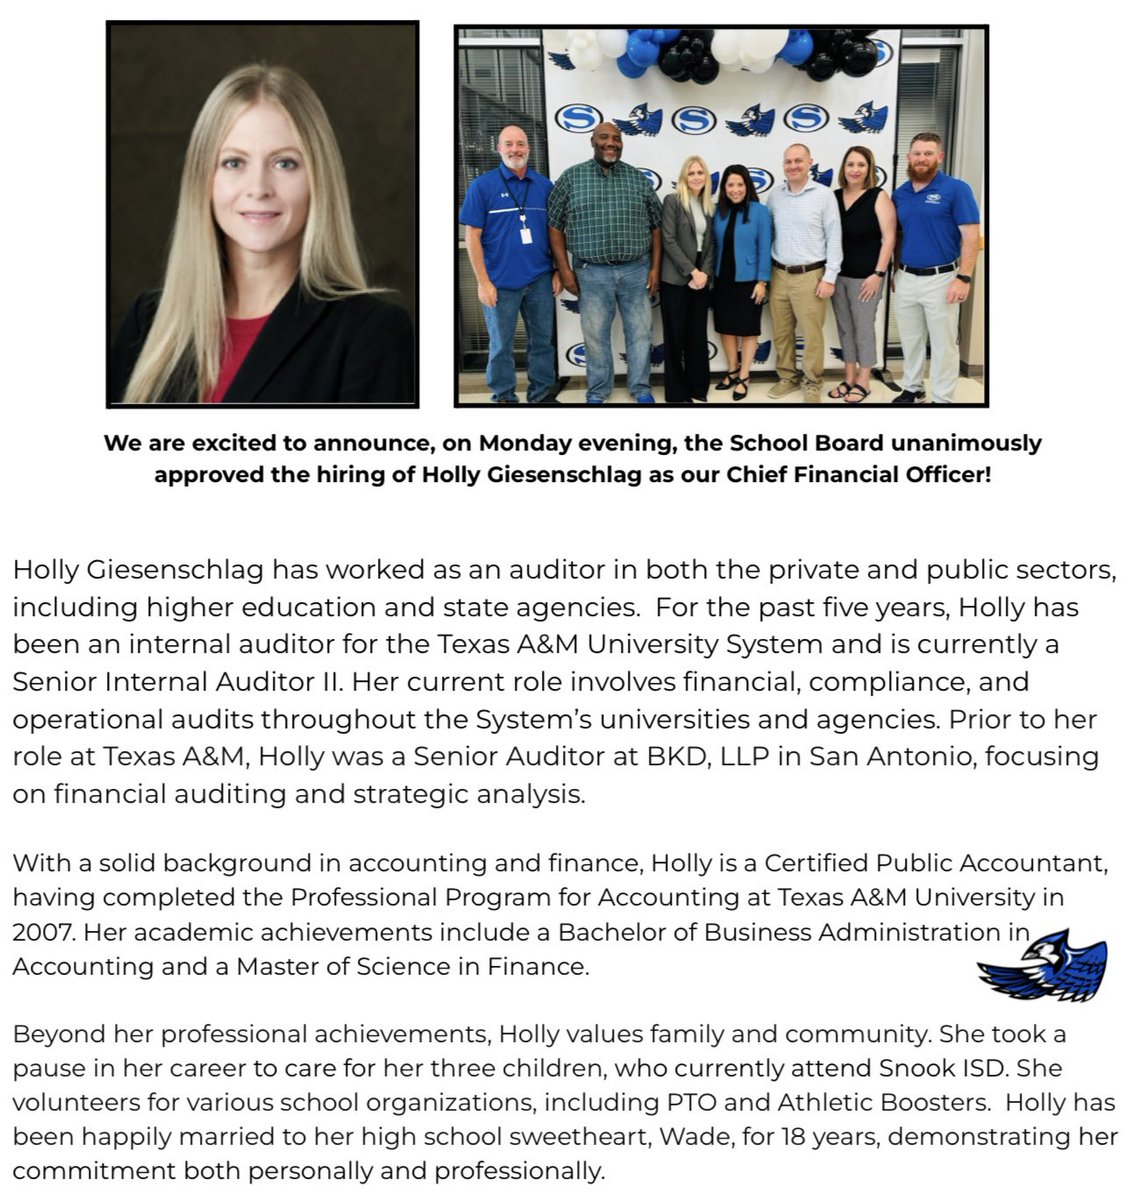 We are ecstatic to announce Holly Giesenschlag as our Chief Financial Officer!